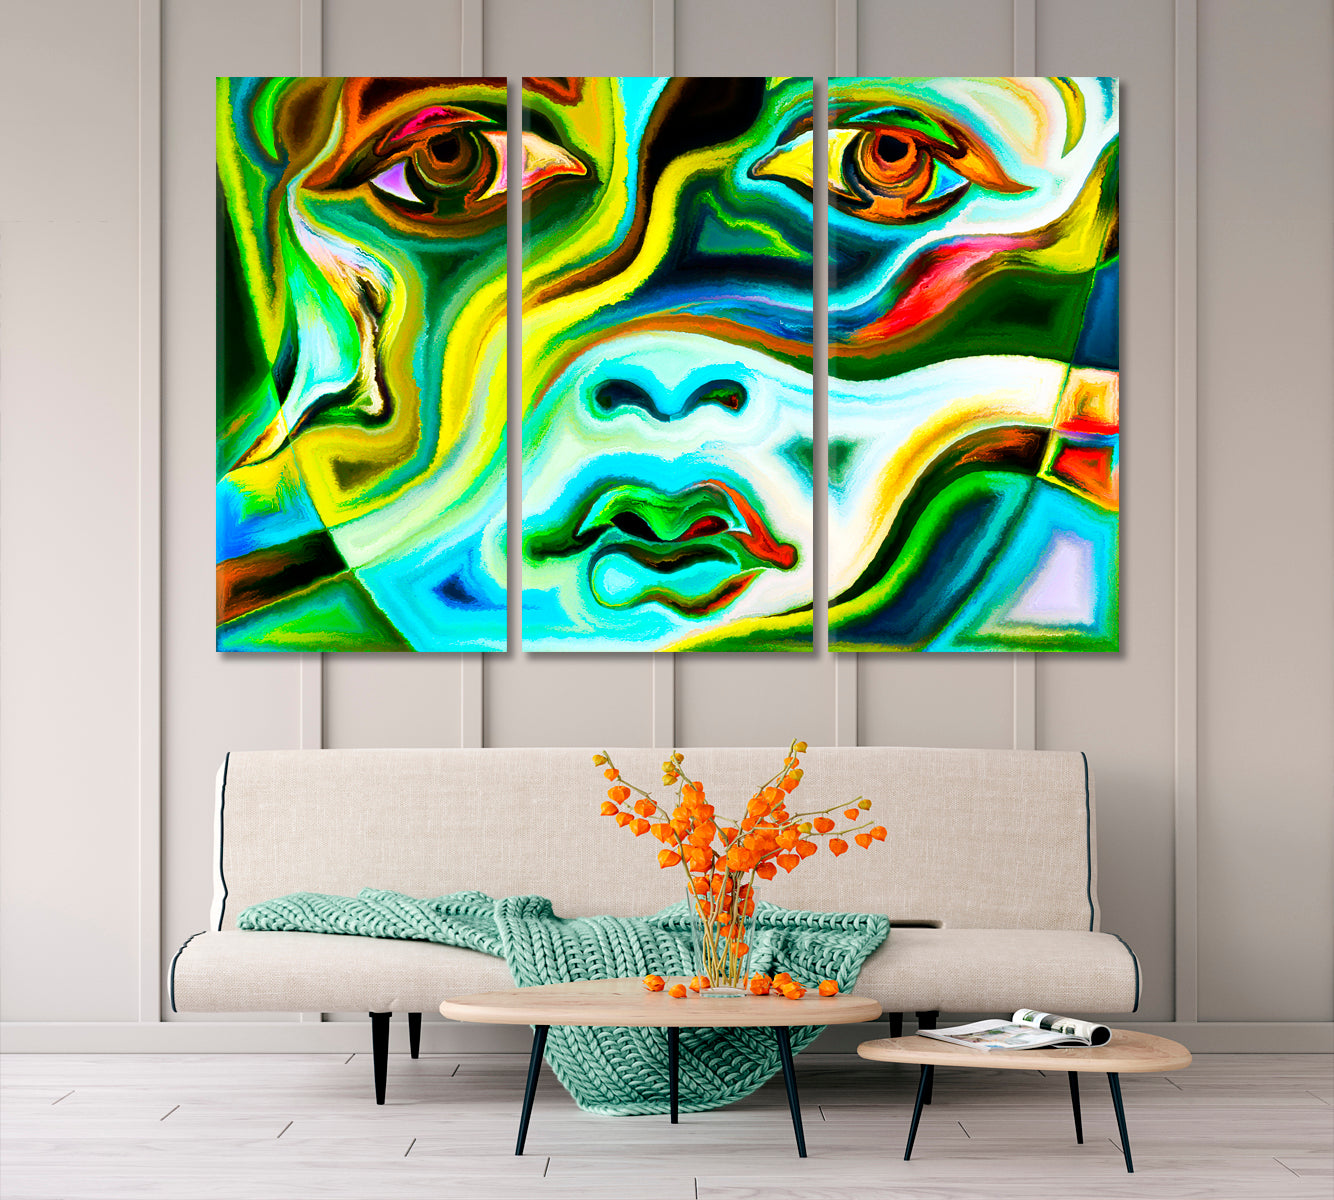 Mood In Colors Abstraction Abstract Art Print Artesty 3 panels 36" x 24" 